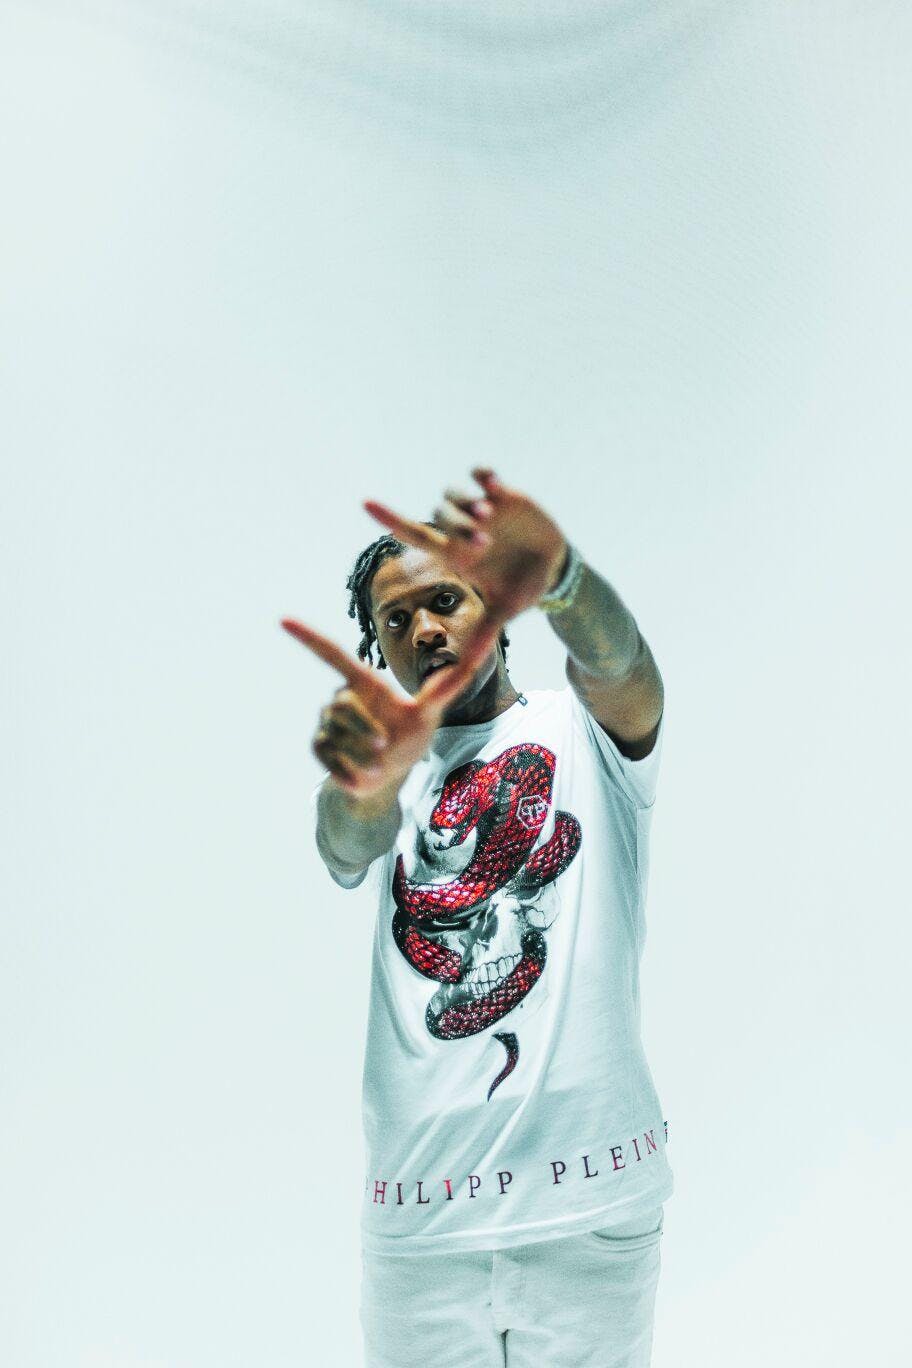 100 King Von And Lil Durk Wallpapers  Wallpaperscom